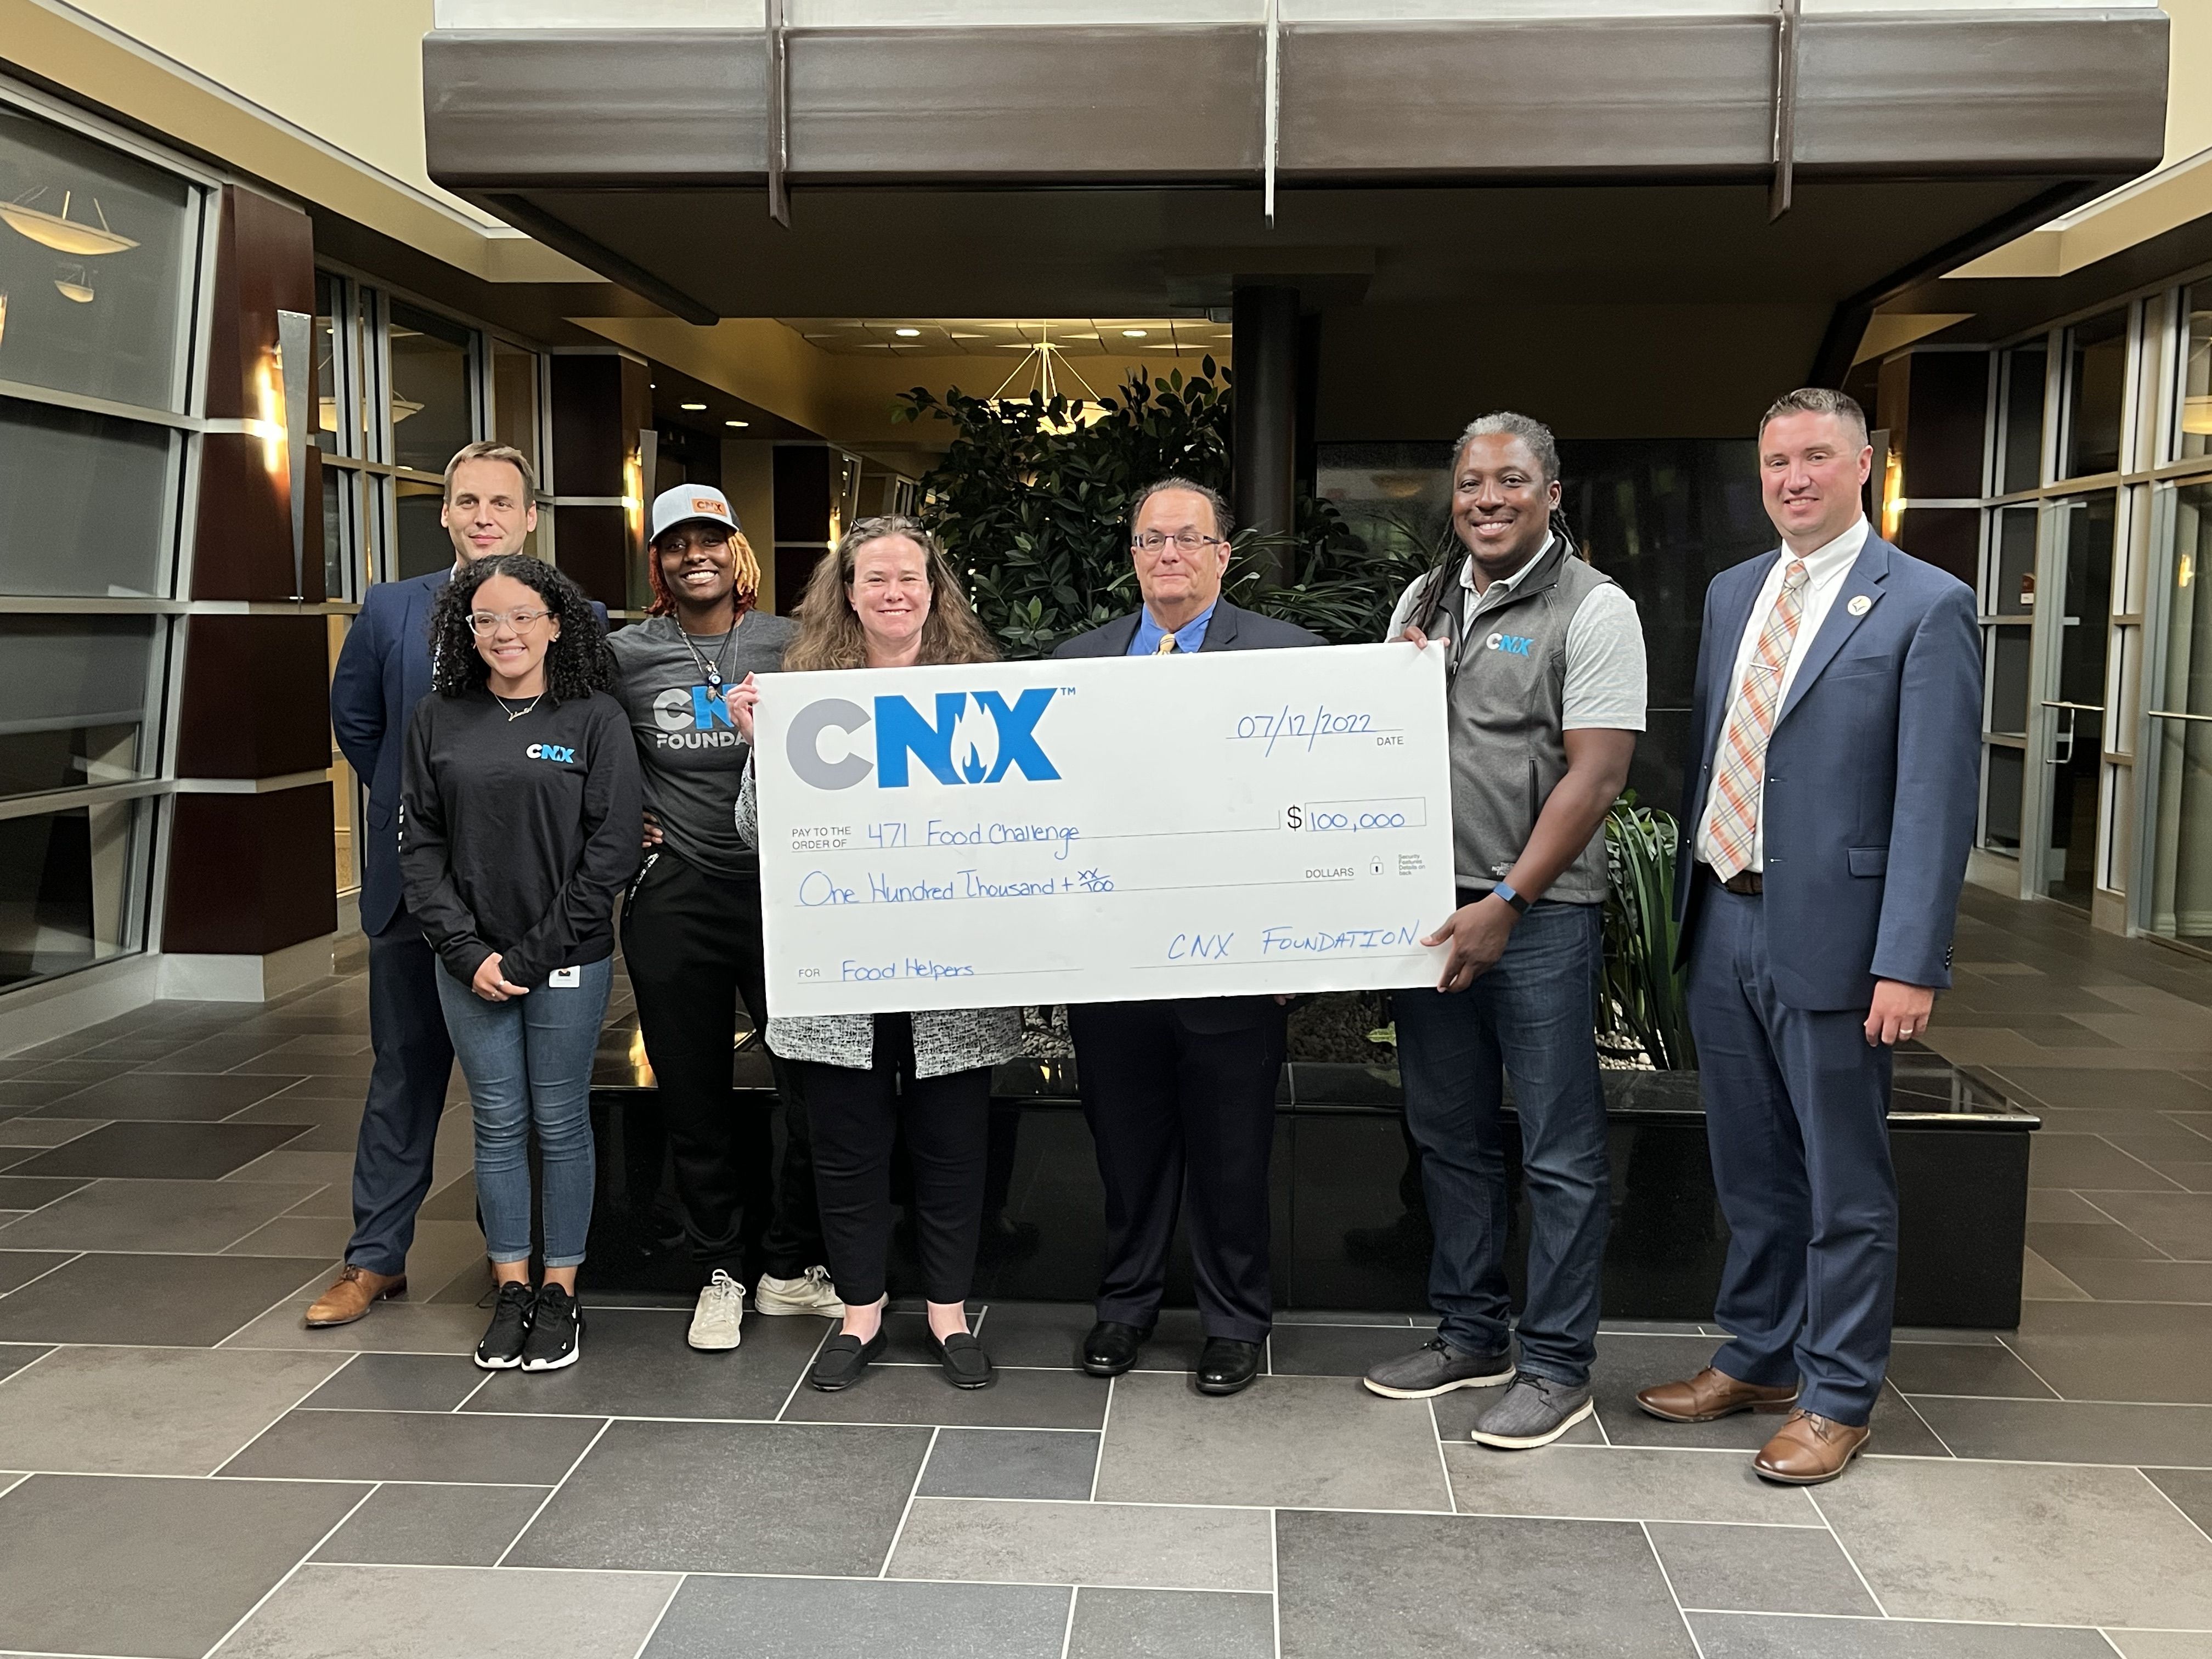 CNX Foundation Donates $100,000 to Jump-Start Fundraising Efforts for Food Helpers’ 471 Kids Challenge. ​
Pictured (Left to Right): Alan Shepard, Chief Financial Officer of CNX Resources; Jocelyn Williams, CNX Foundation and Mentorship Academy Coordinator; Zion Buford, External Affairs Coordinator of CNX Resources; Carrie Crumpton, QEP, Vice President Environmental Strategy of CNX Resources and Food Helpers Board Member; George Omiros, Chief Executive Officer of Food Helpers; Audric Dodds, CNX Director of Community Relations and Executive Director of CNX Foundation; and Chris Claspy, Food Helpers Board President